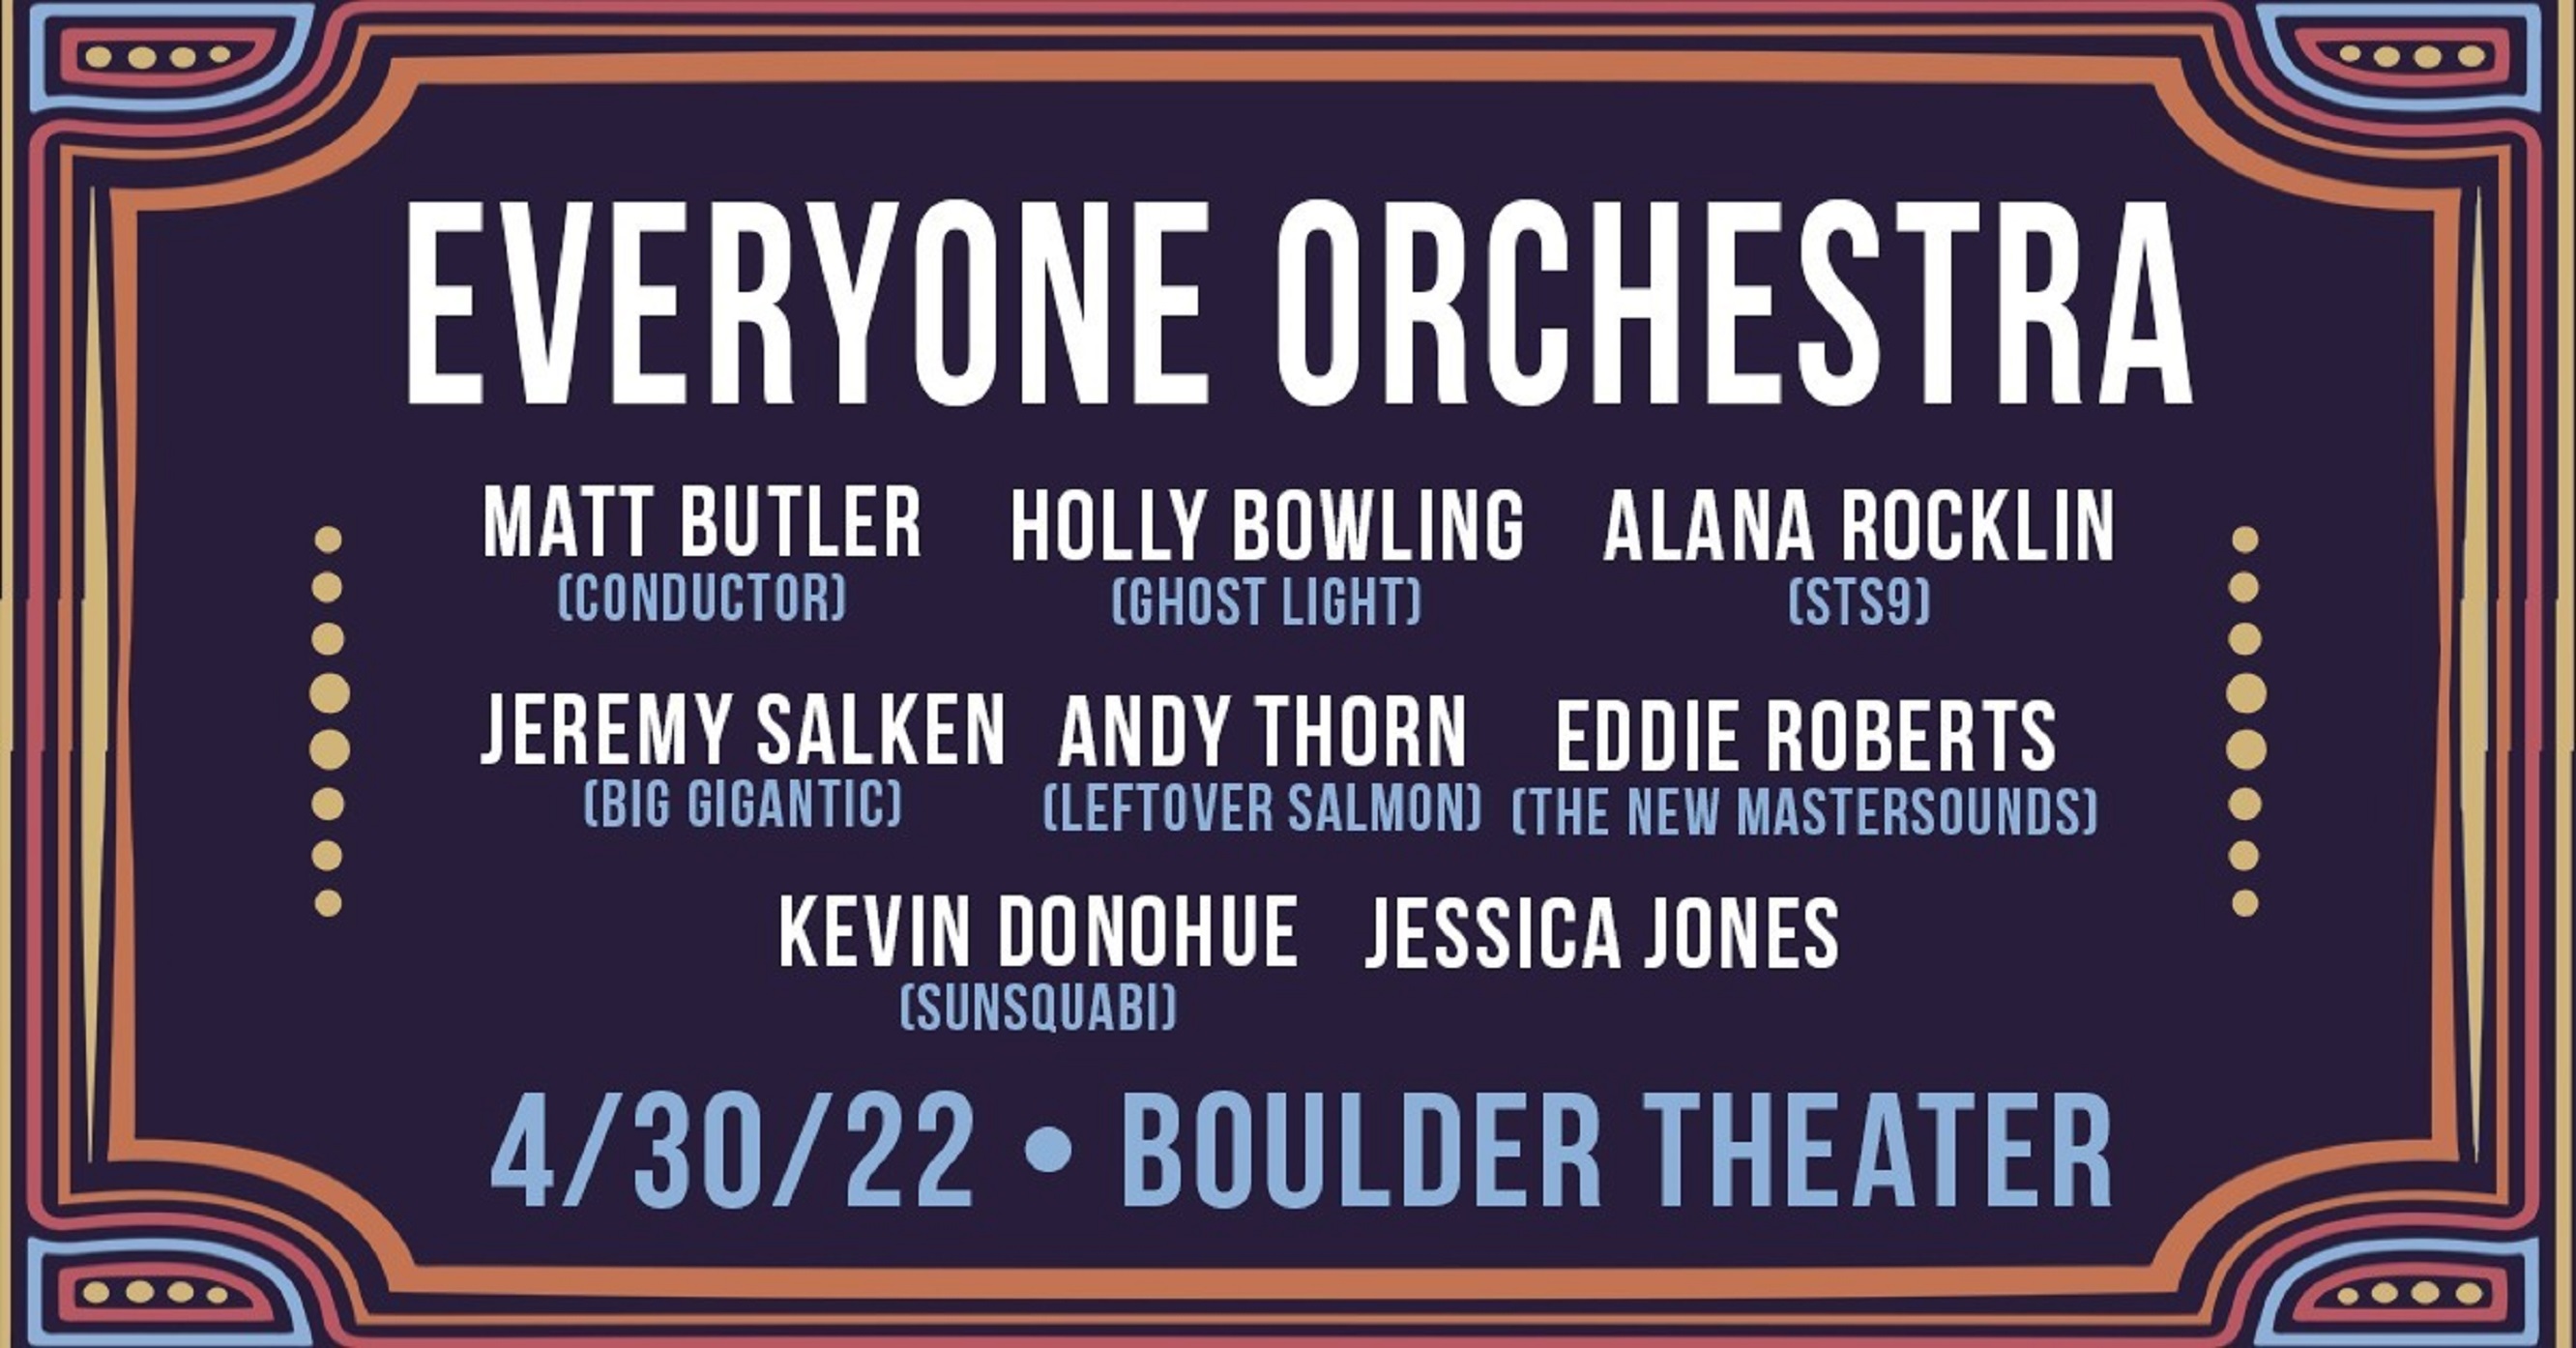 Everyone Orchestra to play The Fox Theatre April 30th, 2022